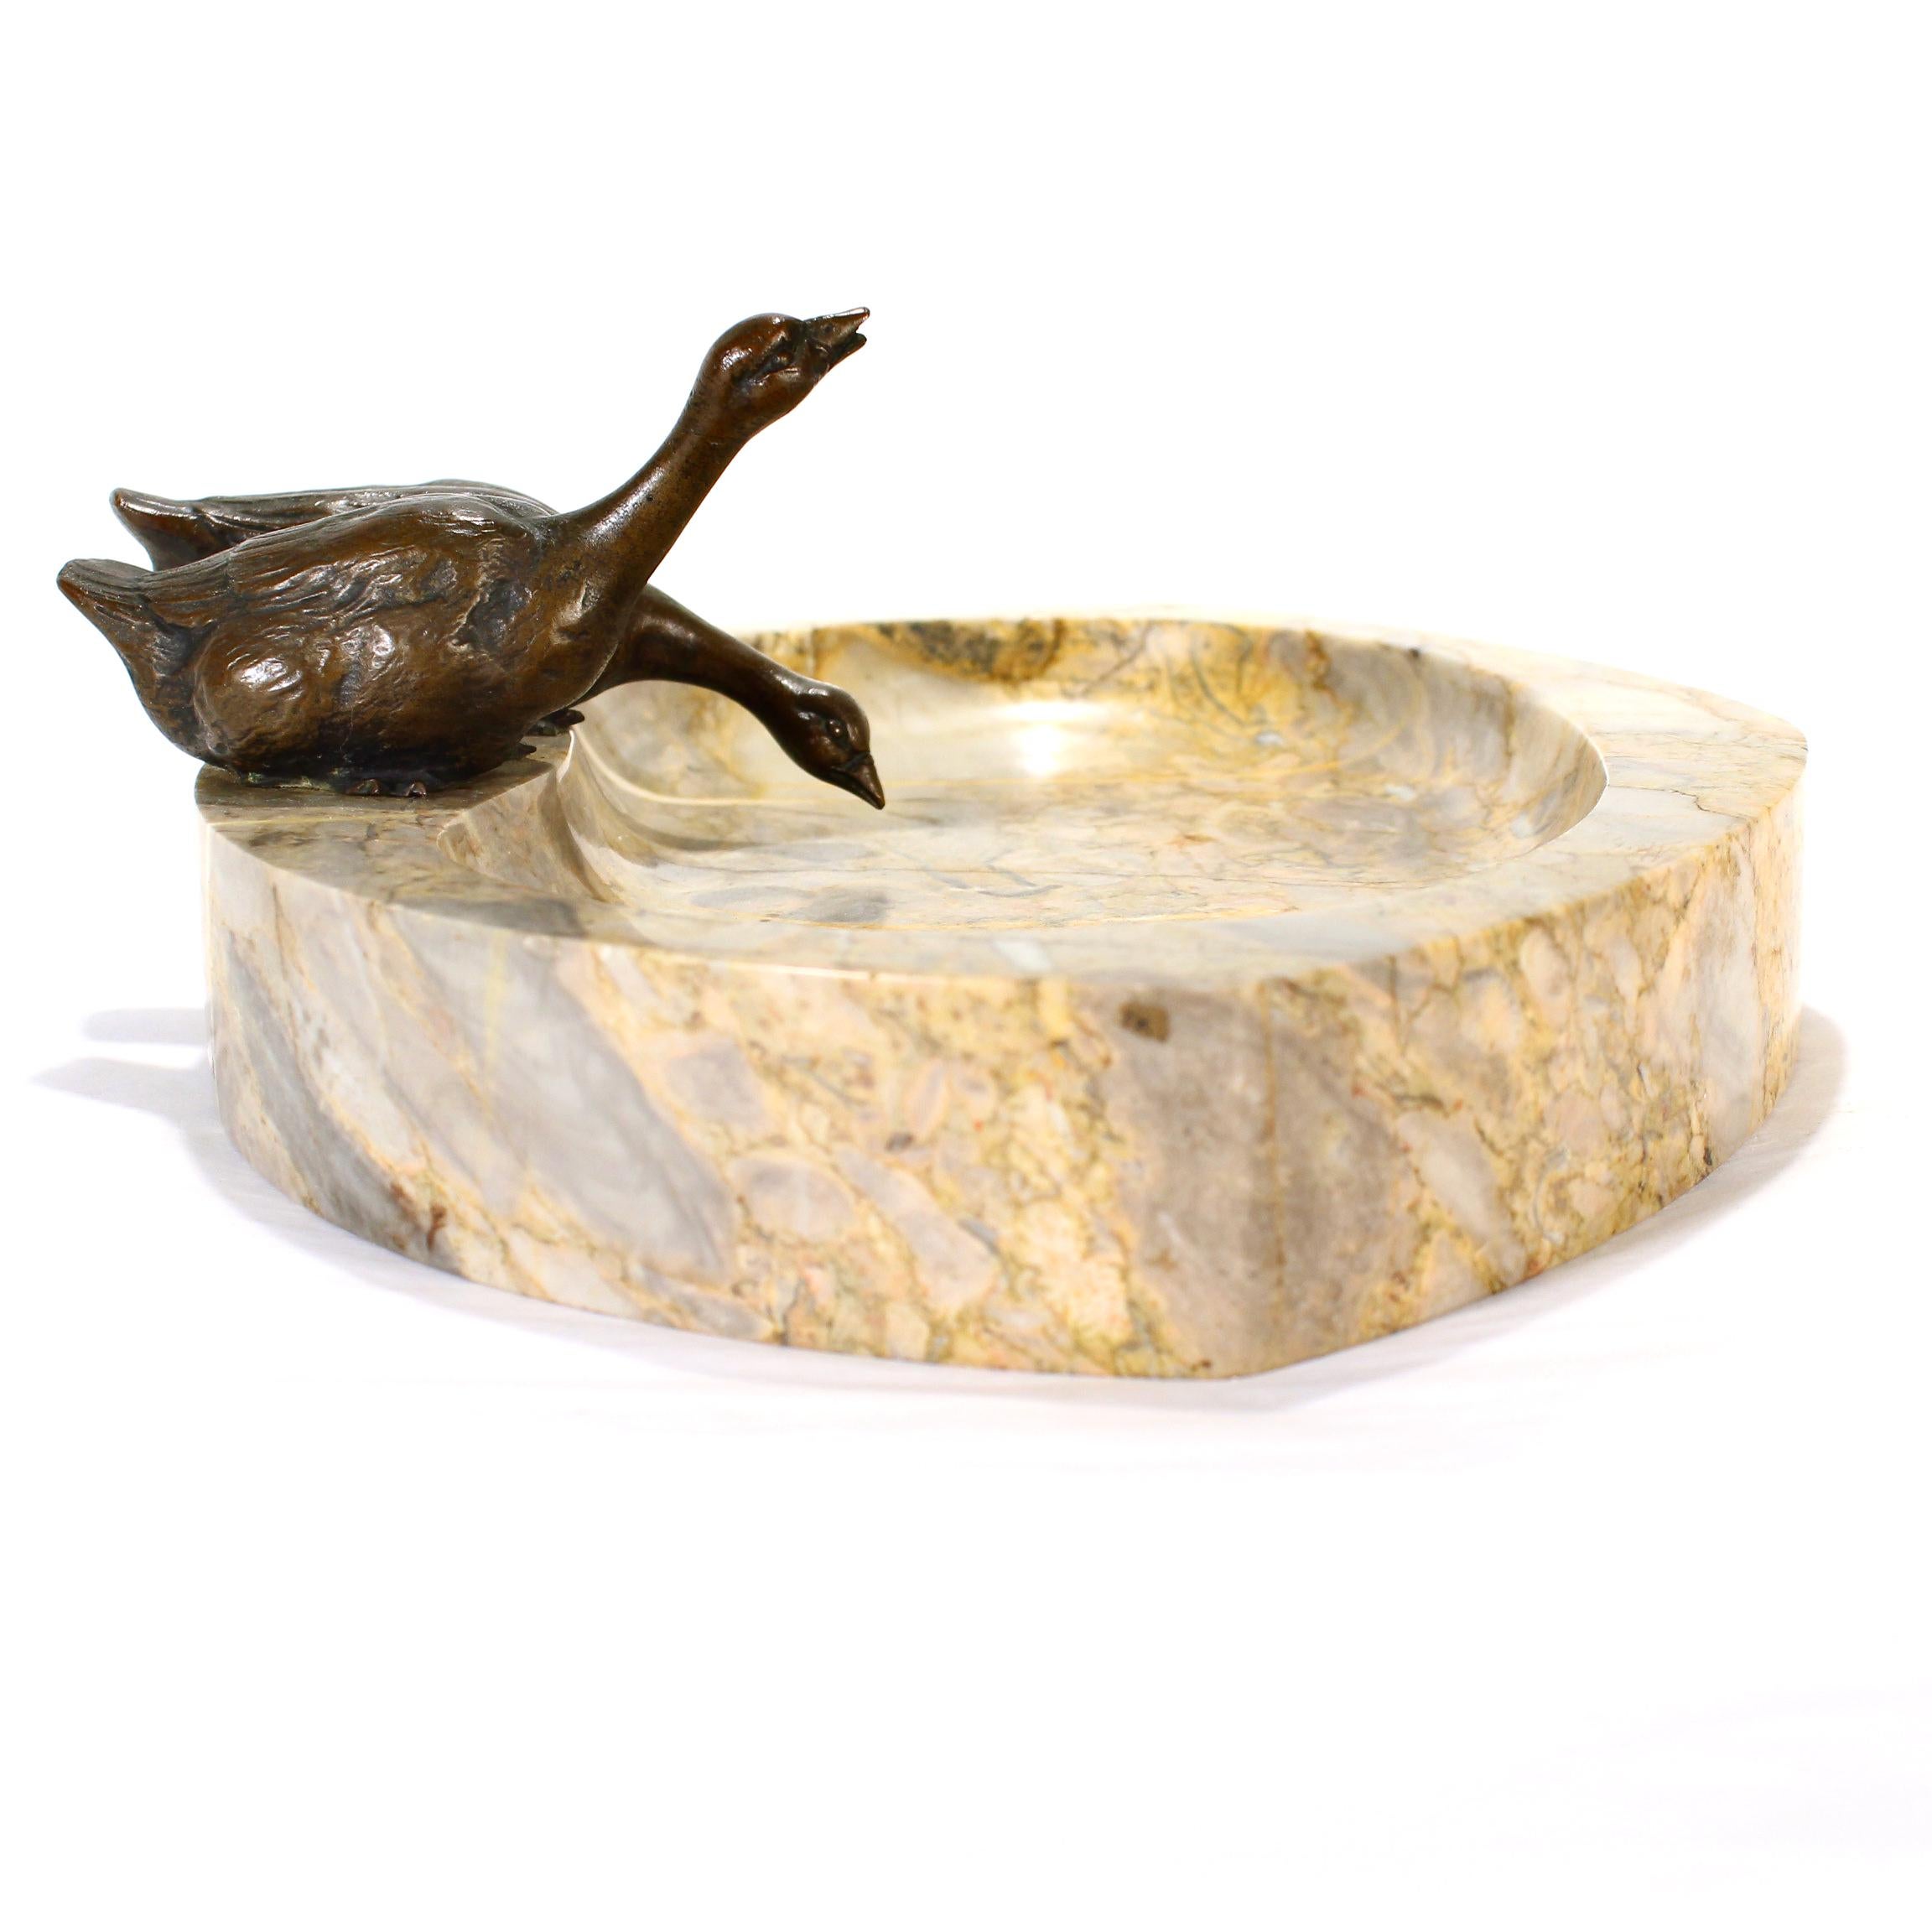 A fine antique vide poche.

Comprising a mottled caramel-colored marble base (or bowl) with mounted with two bronze geese to the top. 

Incised 'Germany' to the underside. 

Simply a wonderful Continental Art Deco piece!

Date:
Early 20th